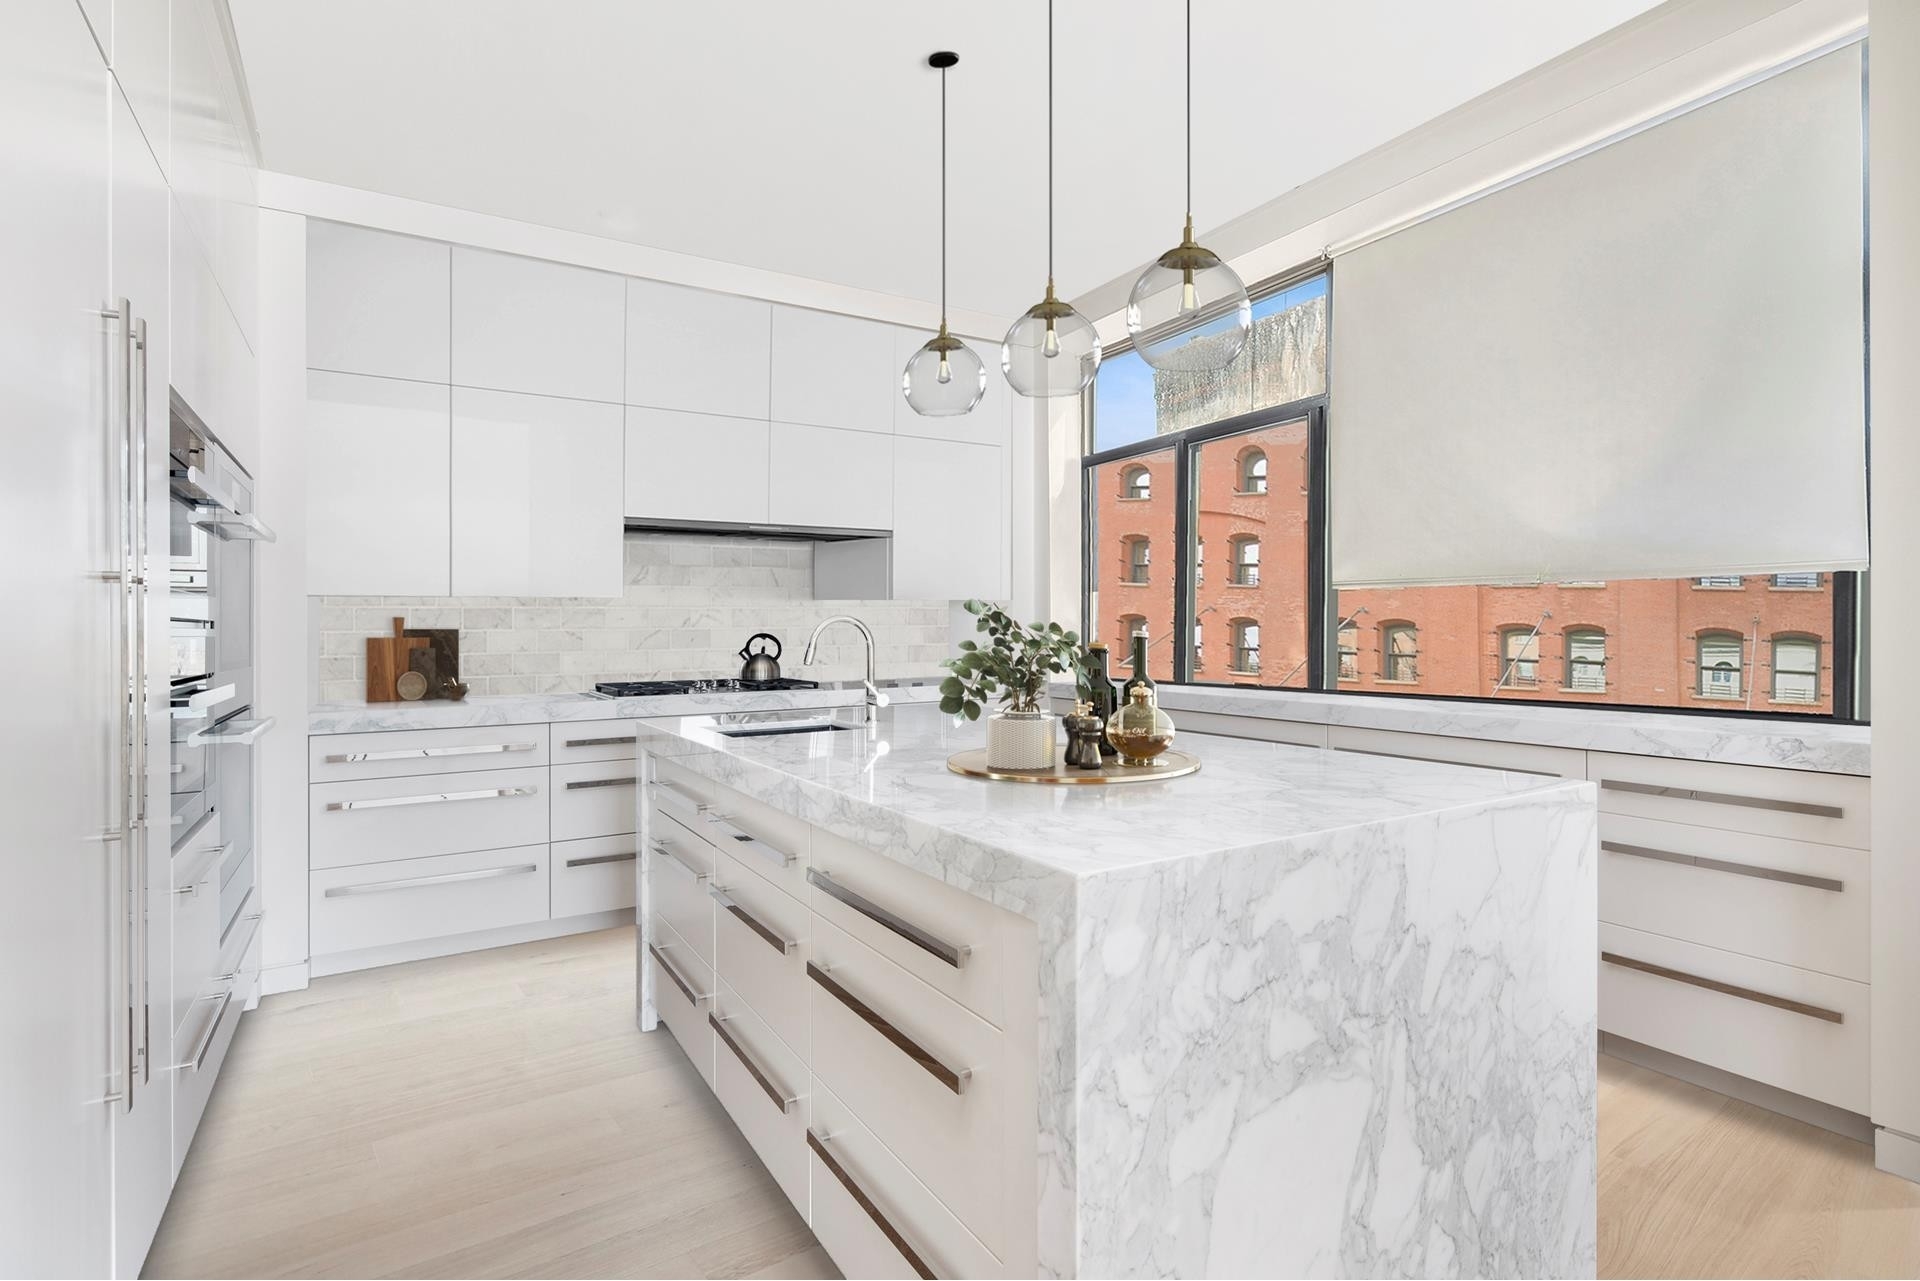 3. Single Family Townhouse for Sale at 430 WASHINGTON ST, TOWNHOUSE TriBeCa, New York, New York 10013